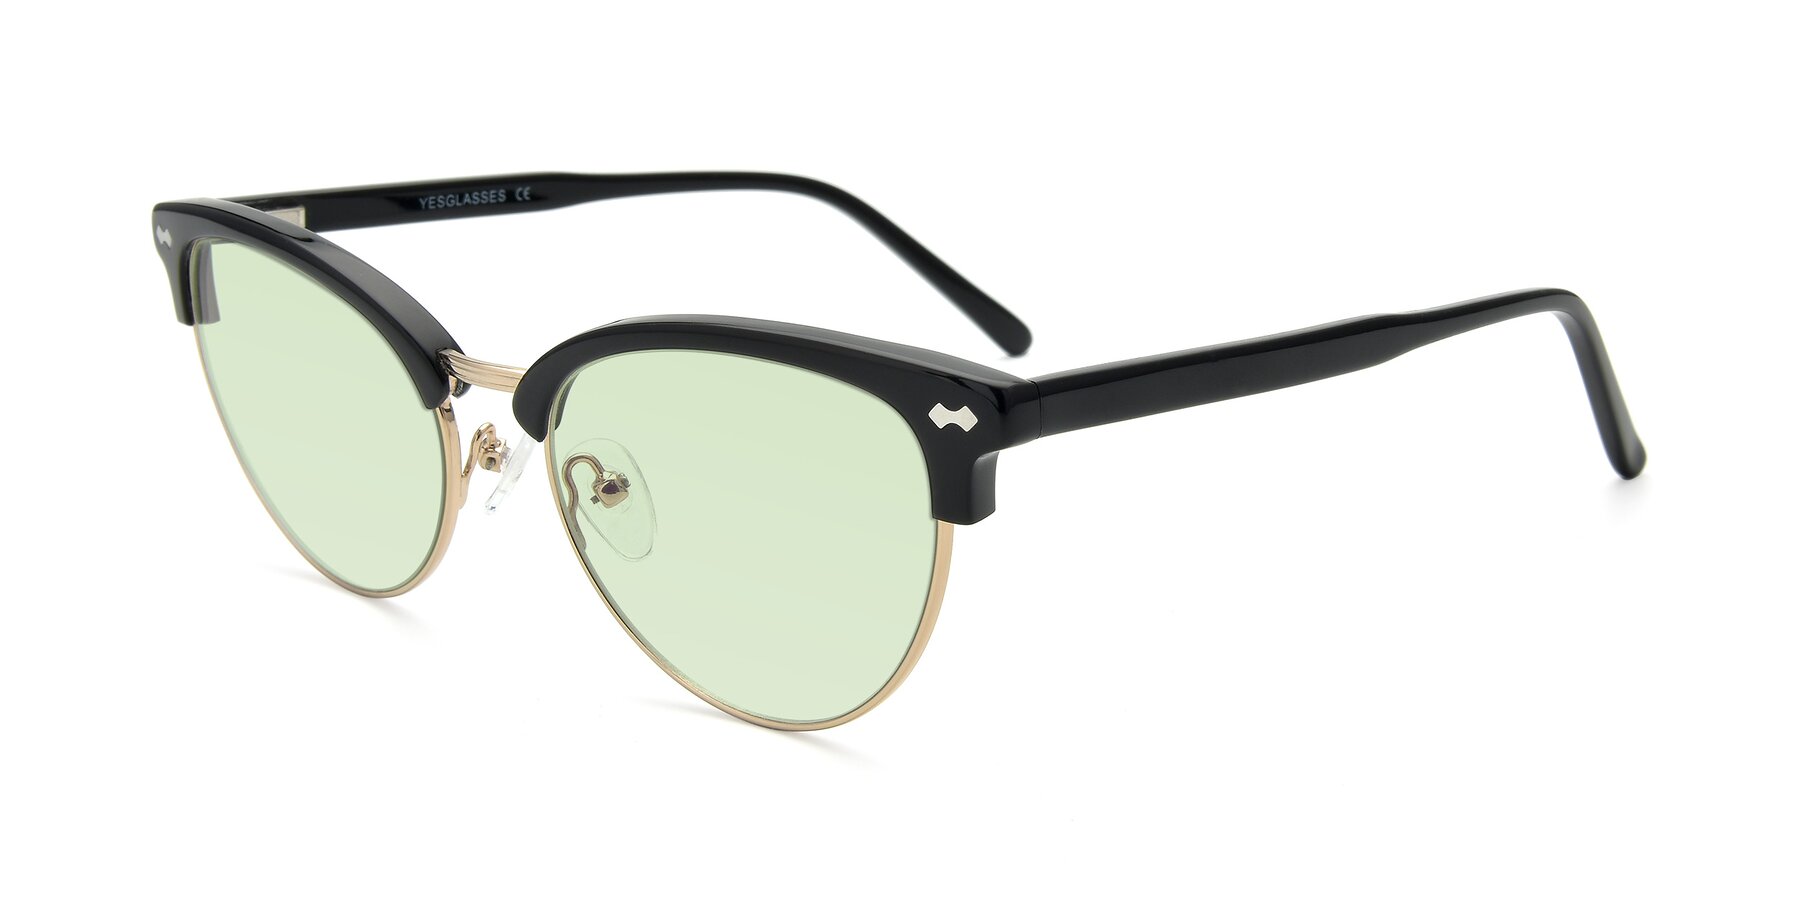 Angle of 17461 in Black-Gold with Light Green Tinted Lenses